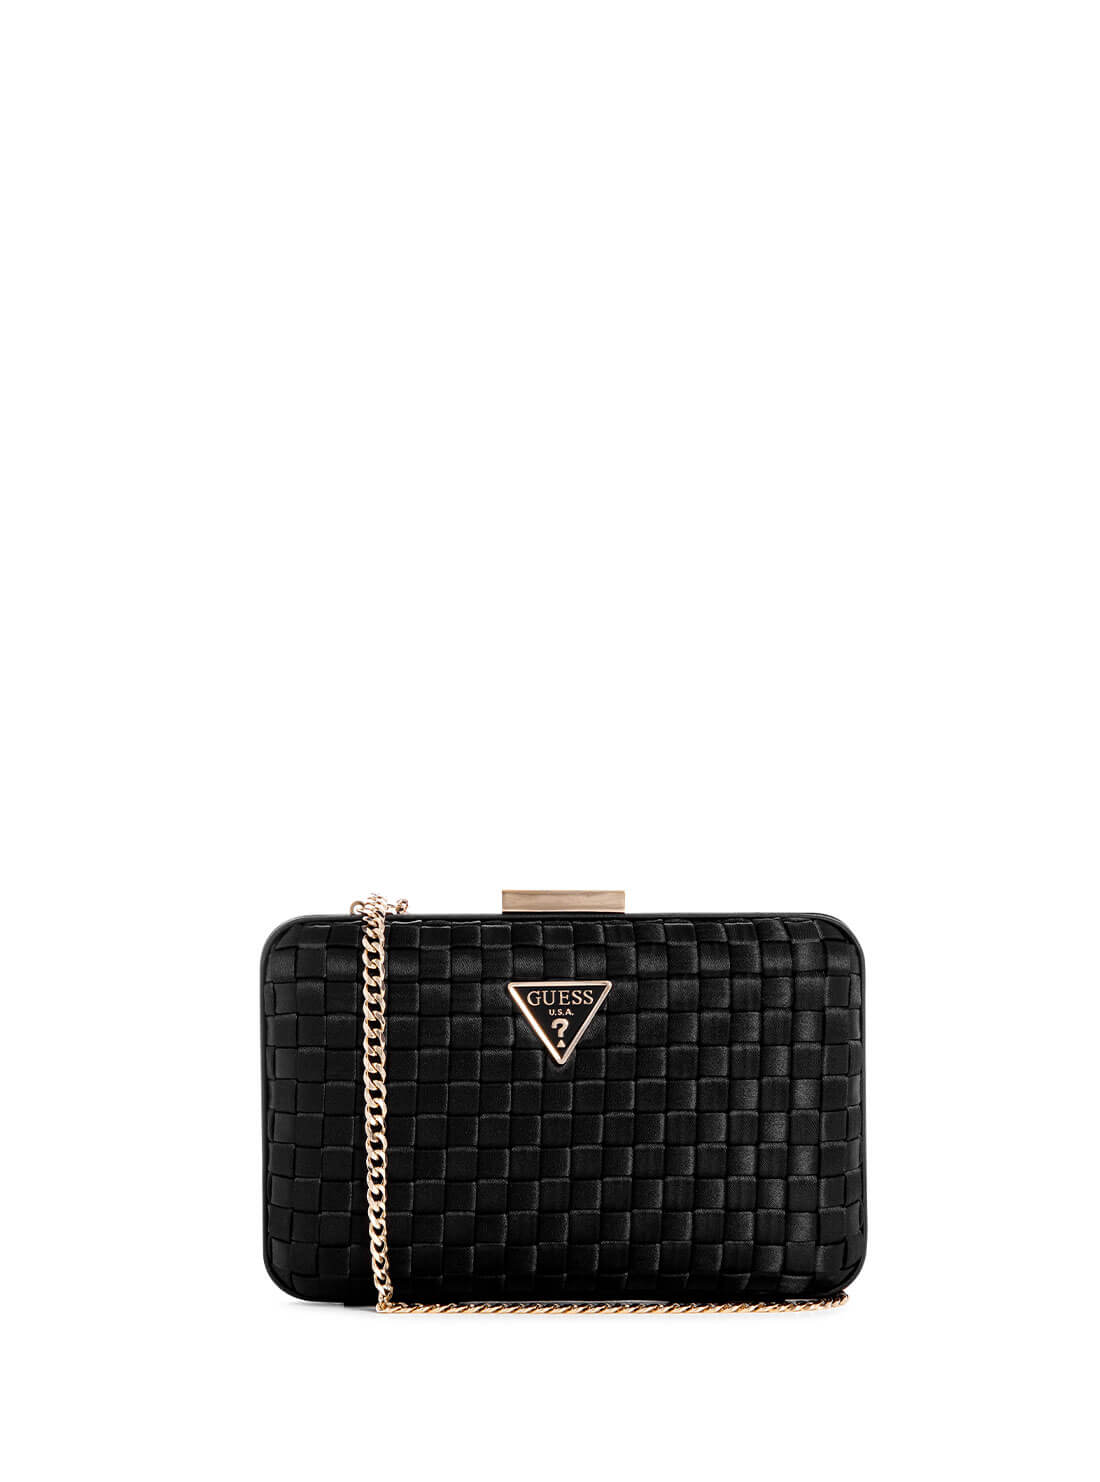 GUESS Black Twiller Minaudiere Clutch Bag front view